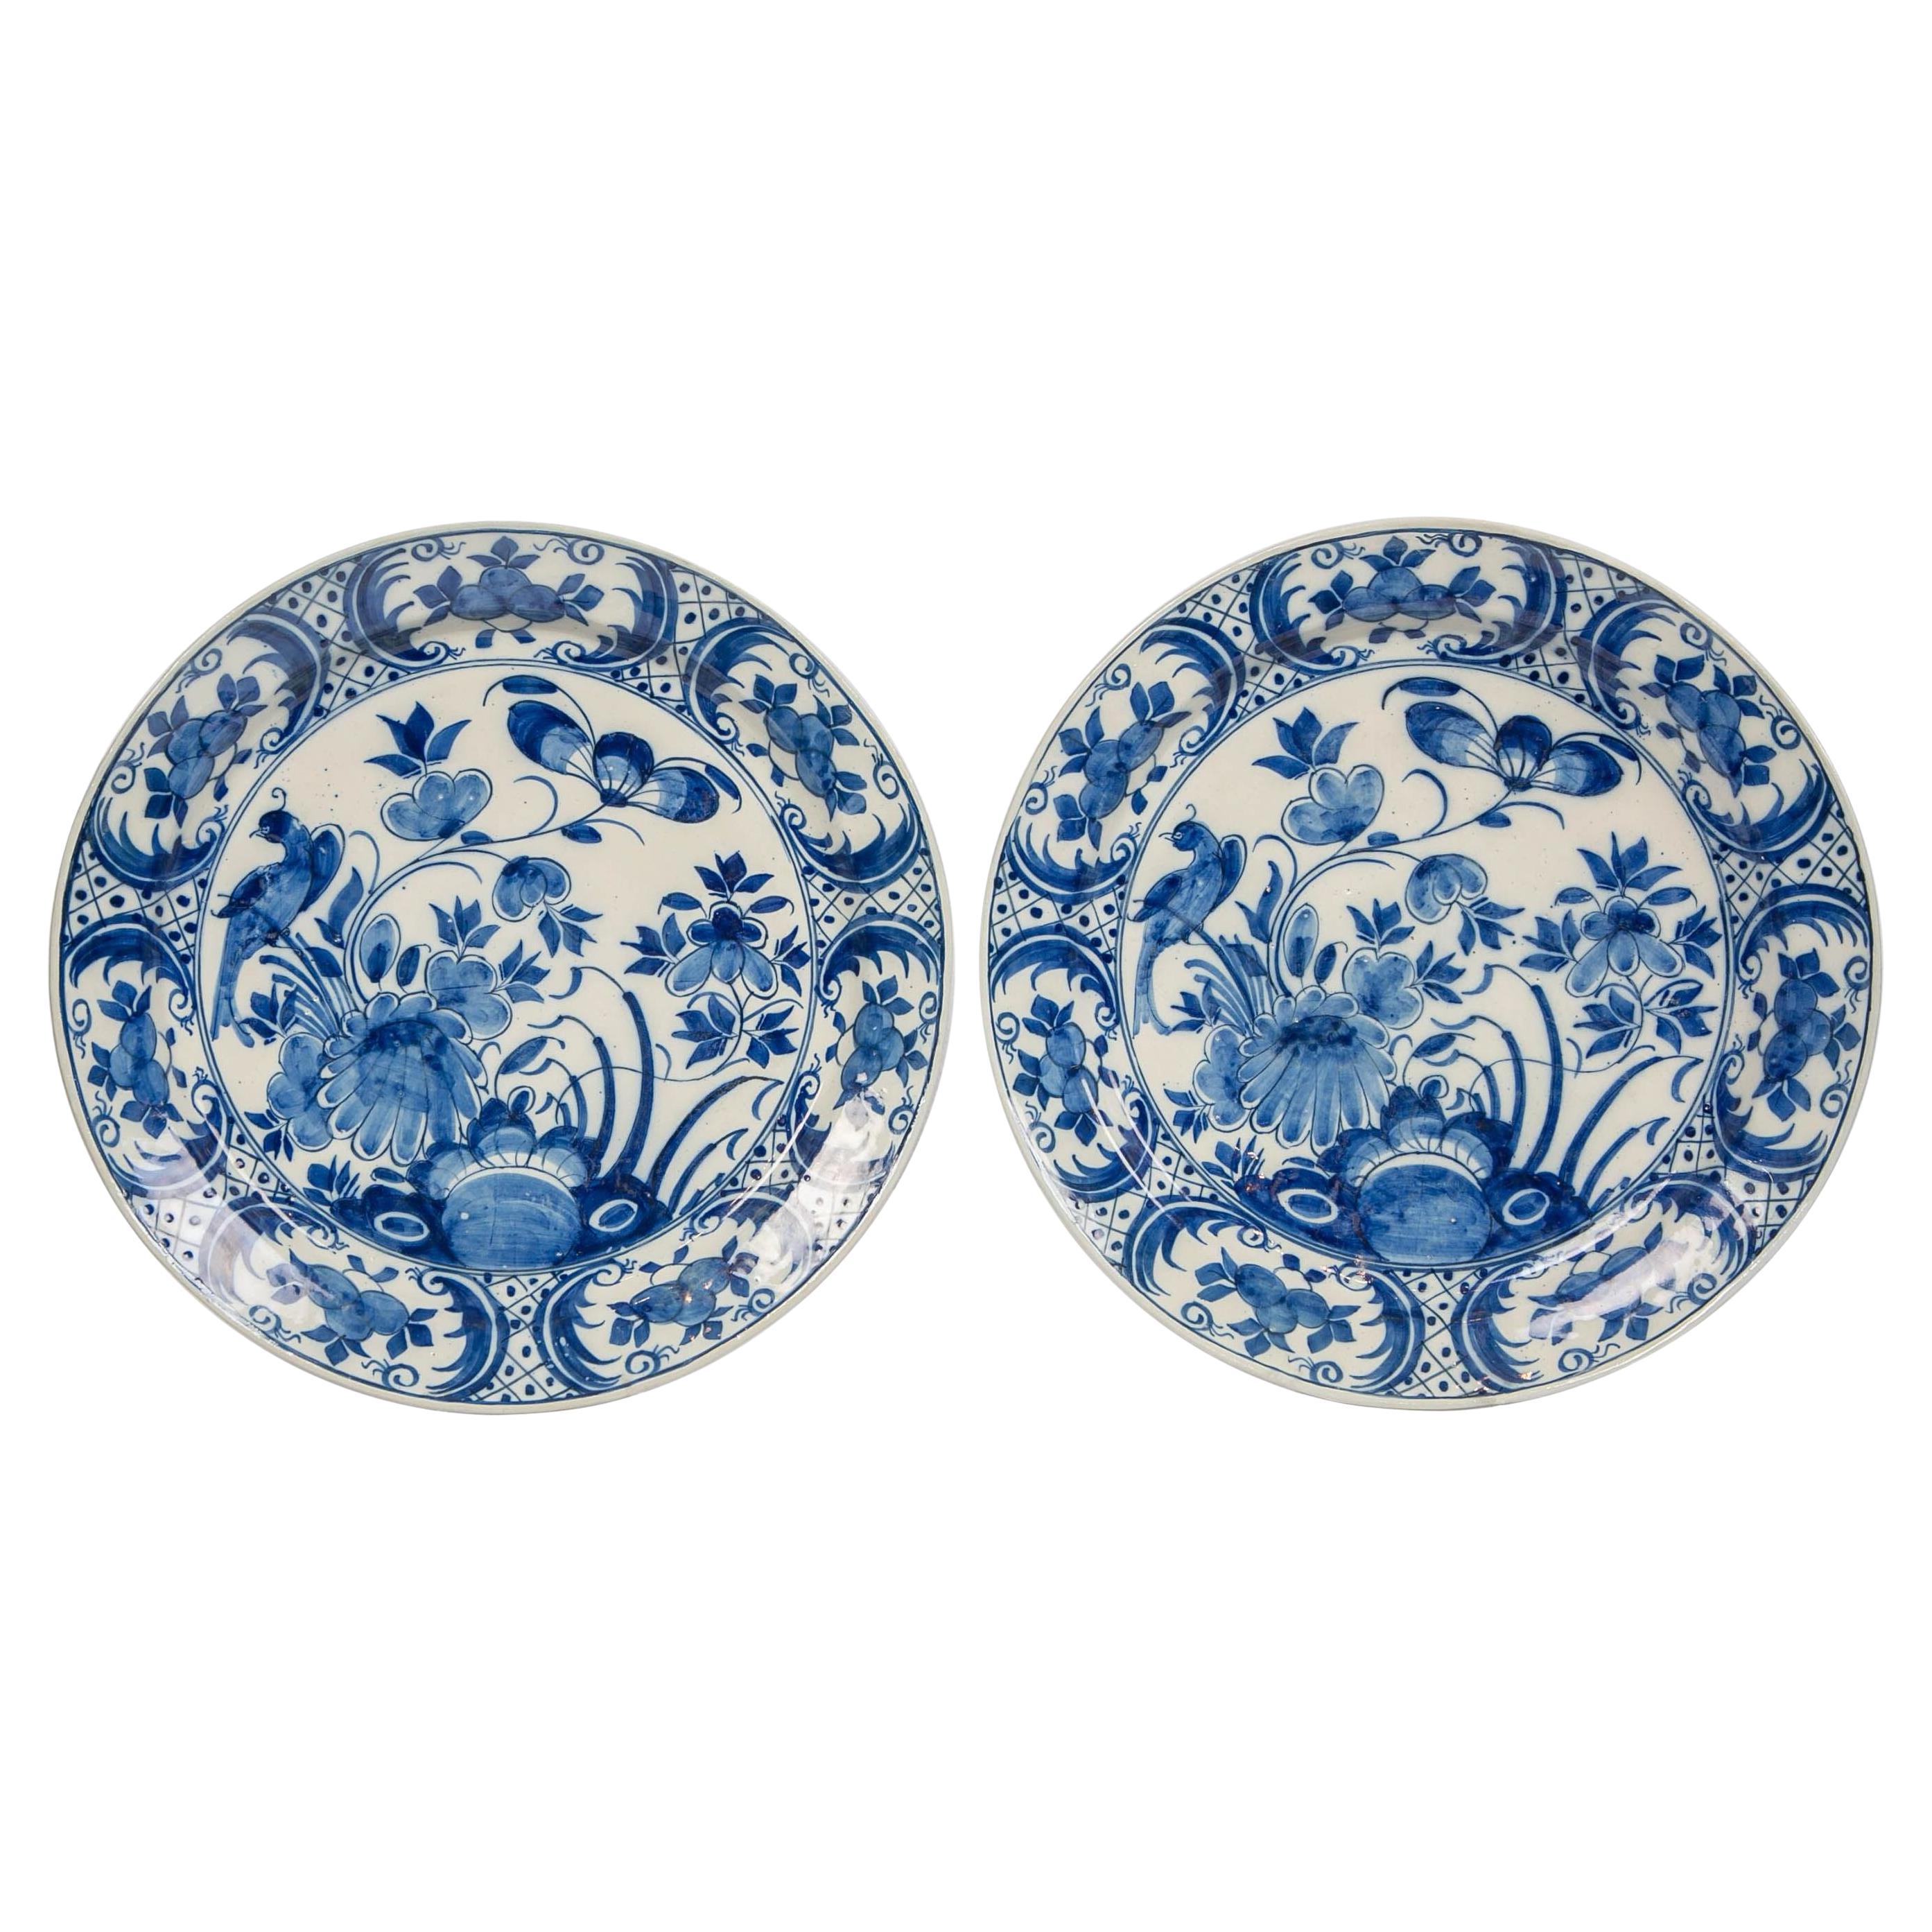 Pair Blue and White Dutch Delft Chargers with Songbirds Made Circa 1770